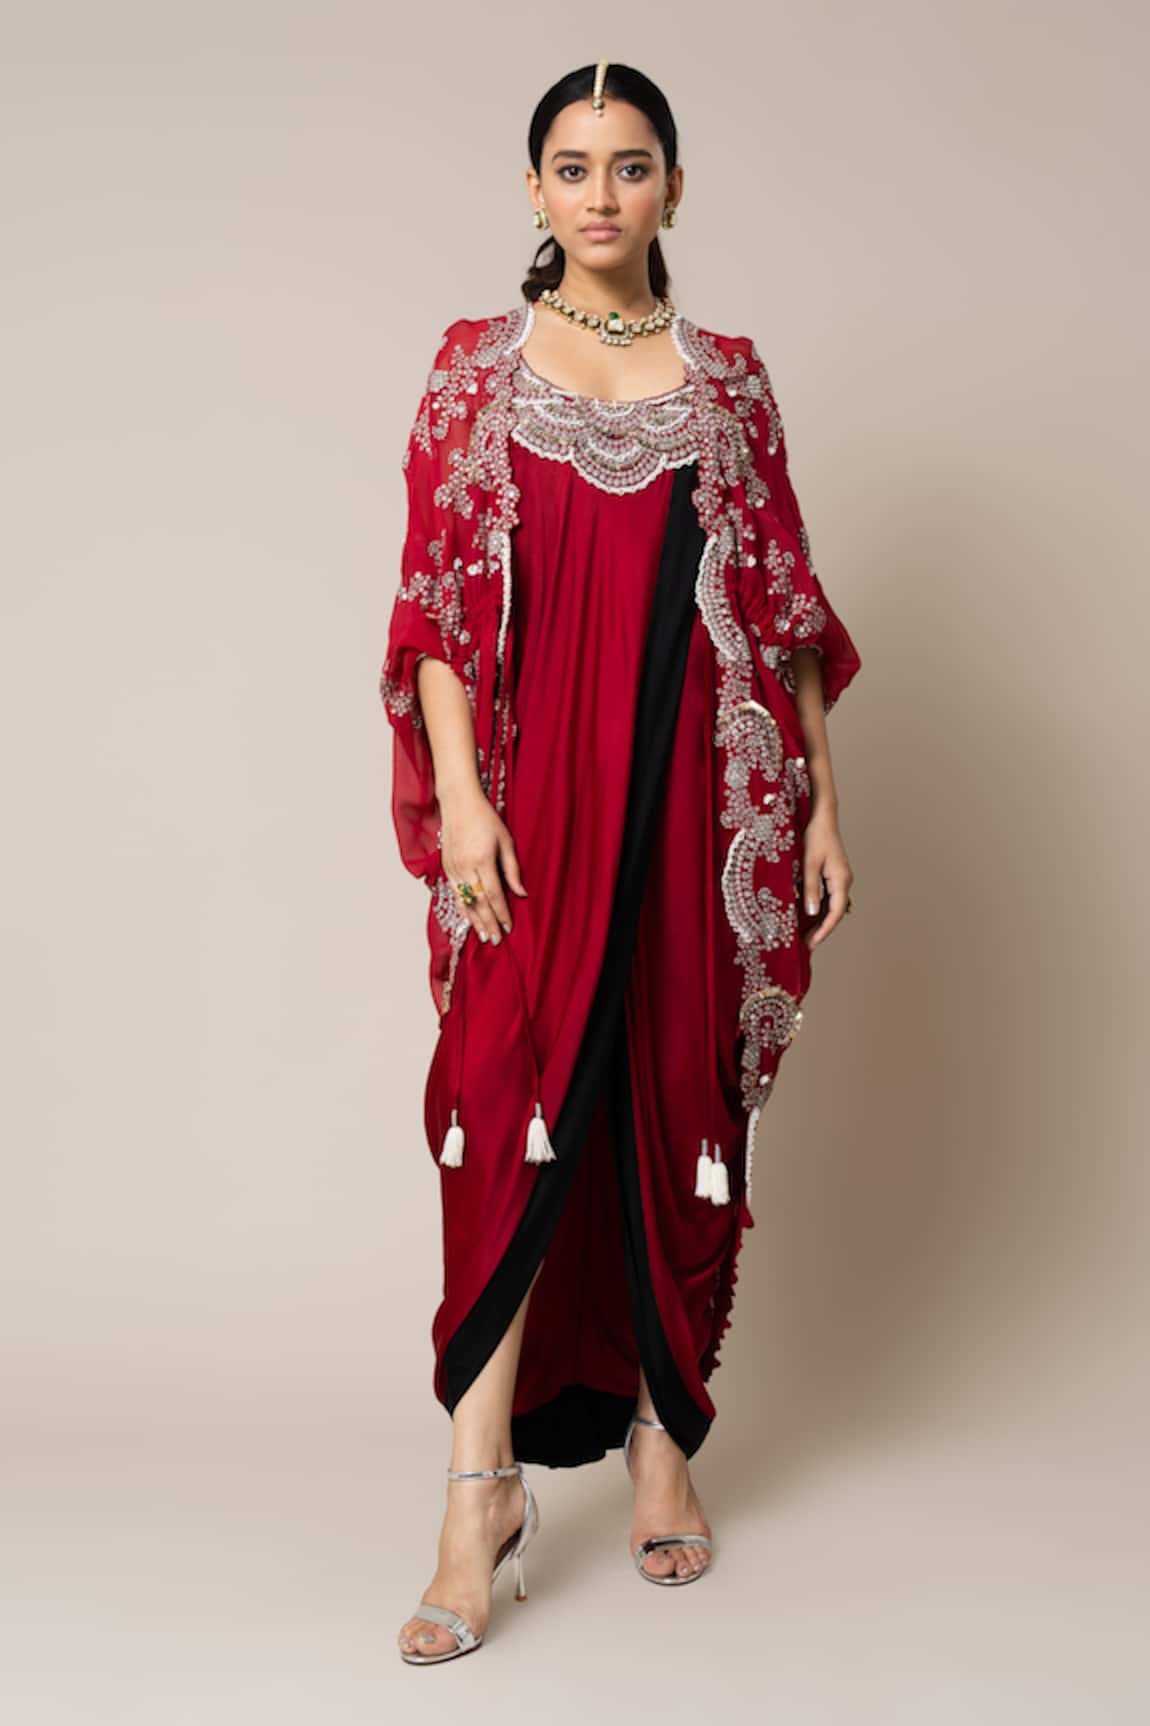 Nupur Kanoi Hand Embroidered Cape With Dress